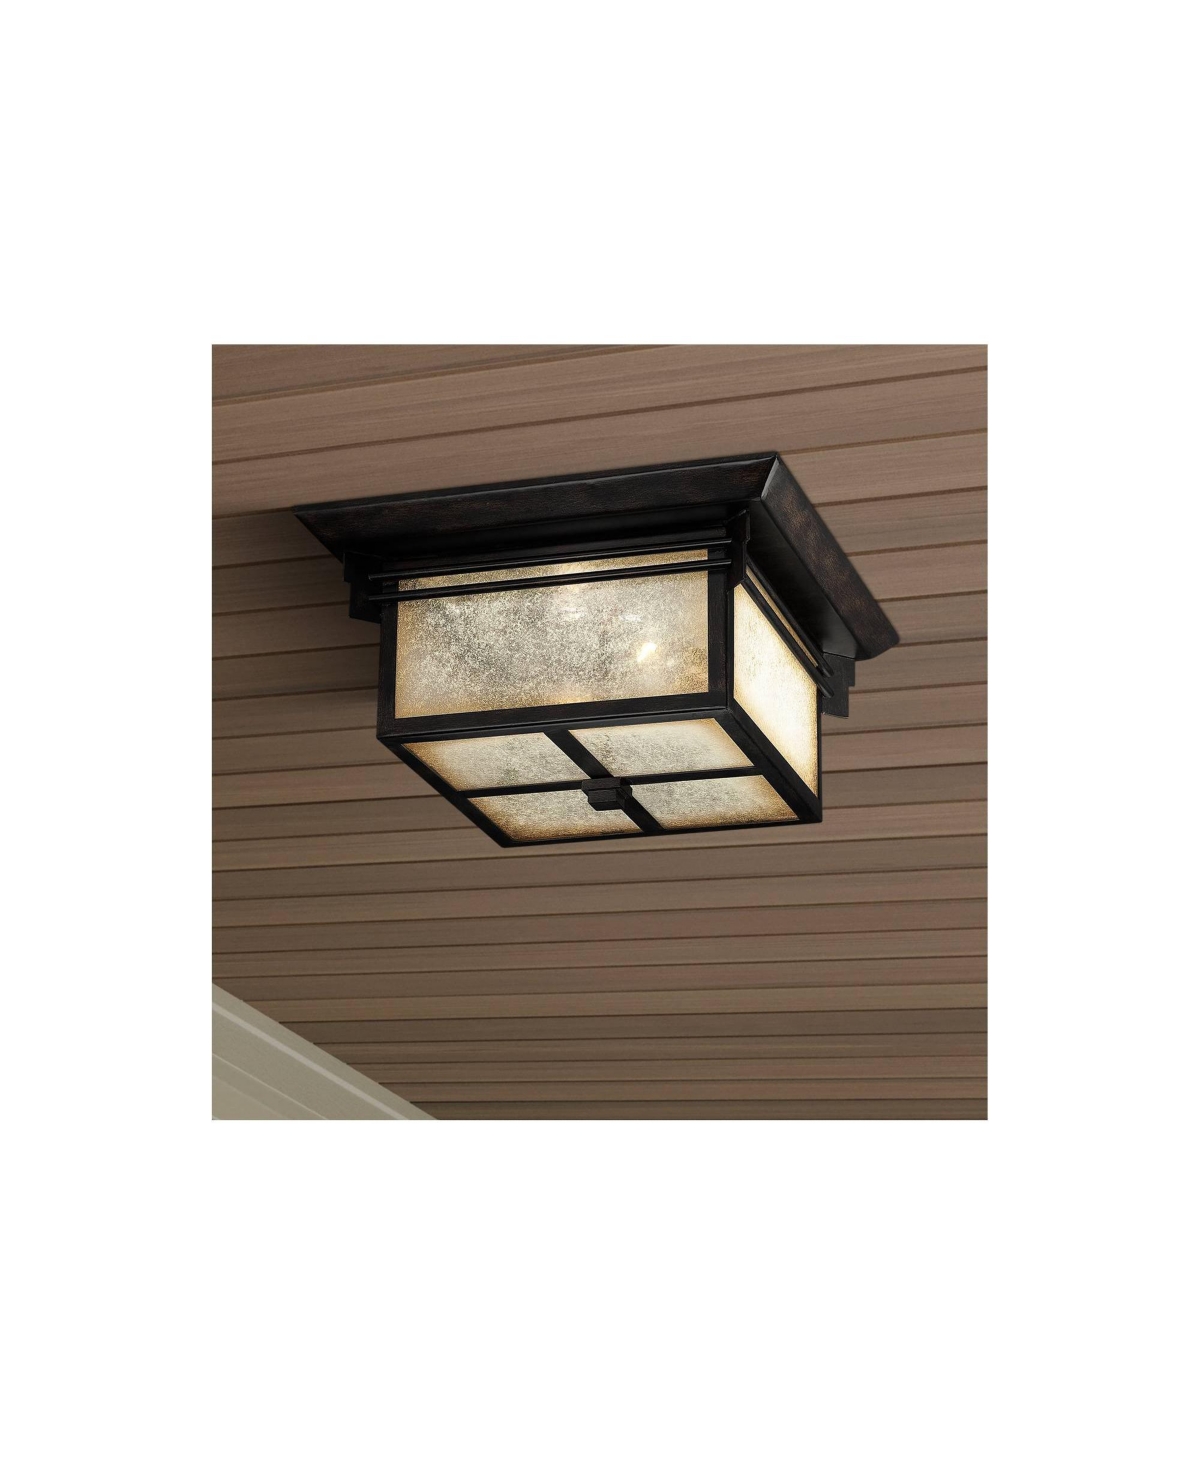 Hickory Point Mission Rustic Outdoor Ceiling Light Flush-Mount Fixture Walnut Bronze Steel 15" Frosted Cream Glass Damp Rated Exterior House Porch Pat